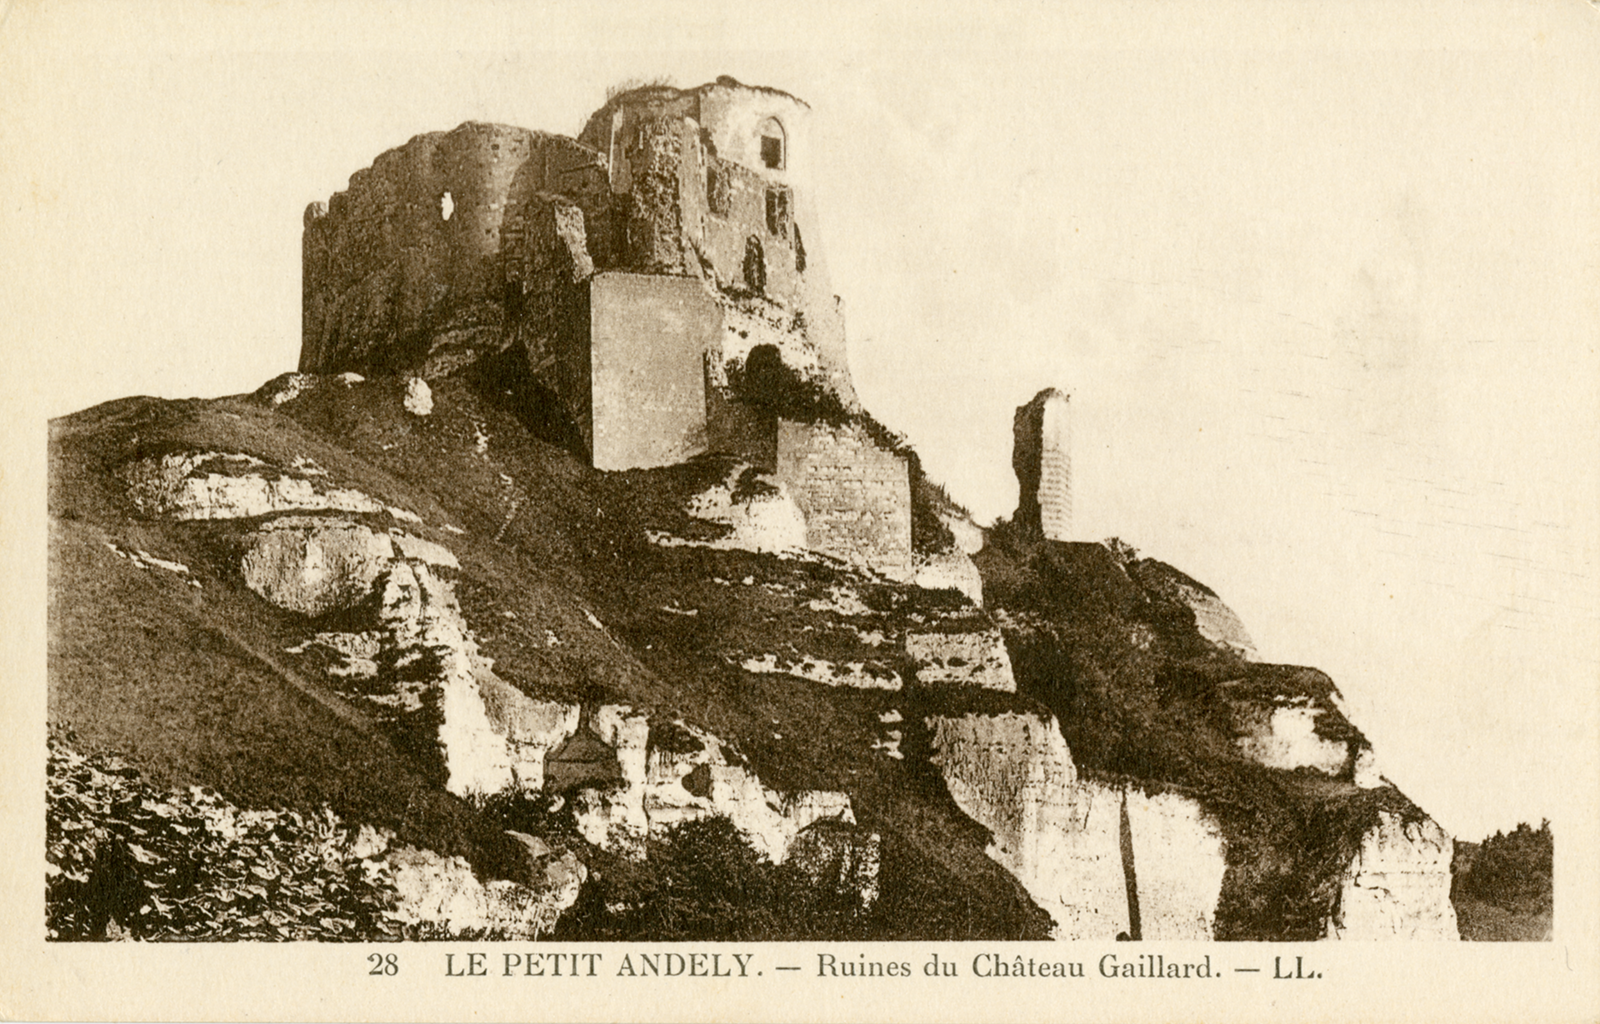 A sepia photograph of a rocky hill with the ruins of a building or chatue standing at the top. The bottom text states &ldquo;28 LEPTIT ANDELY. – Ruines du Chateau Gaillard&rdquo;